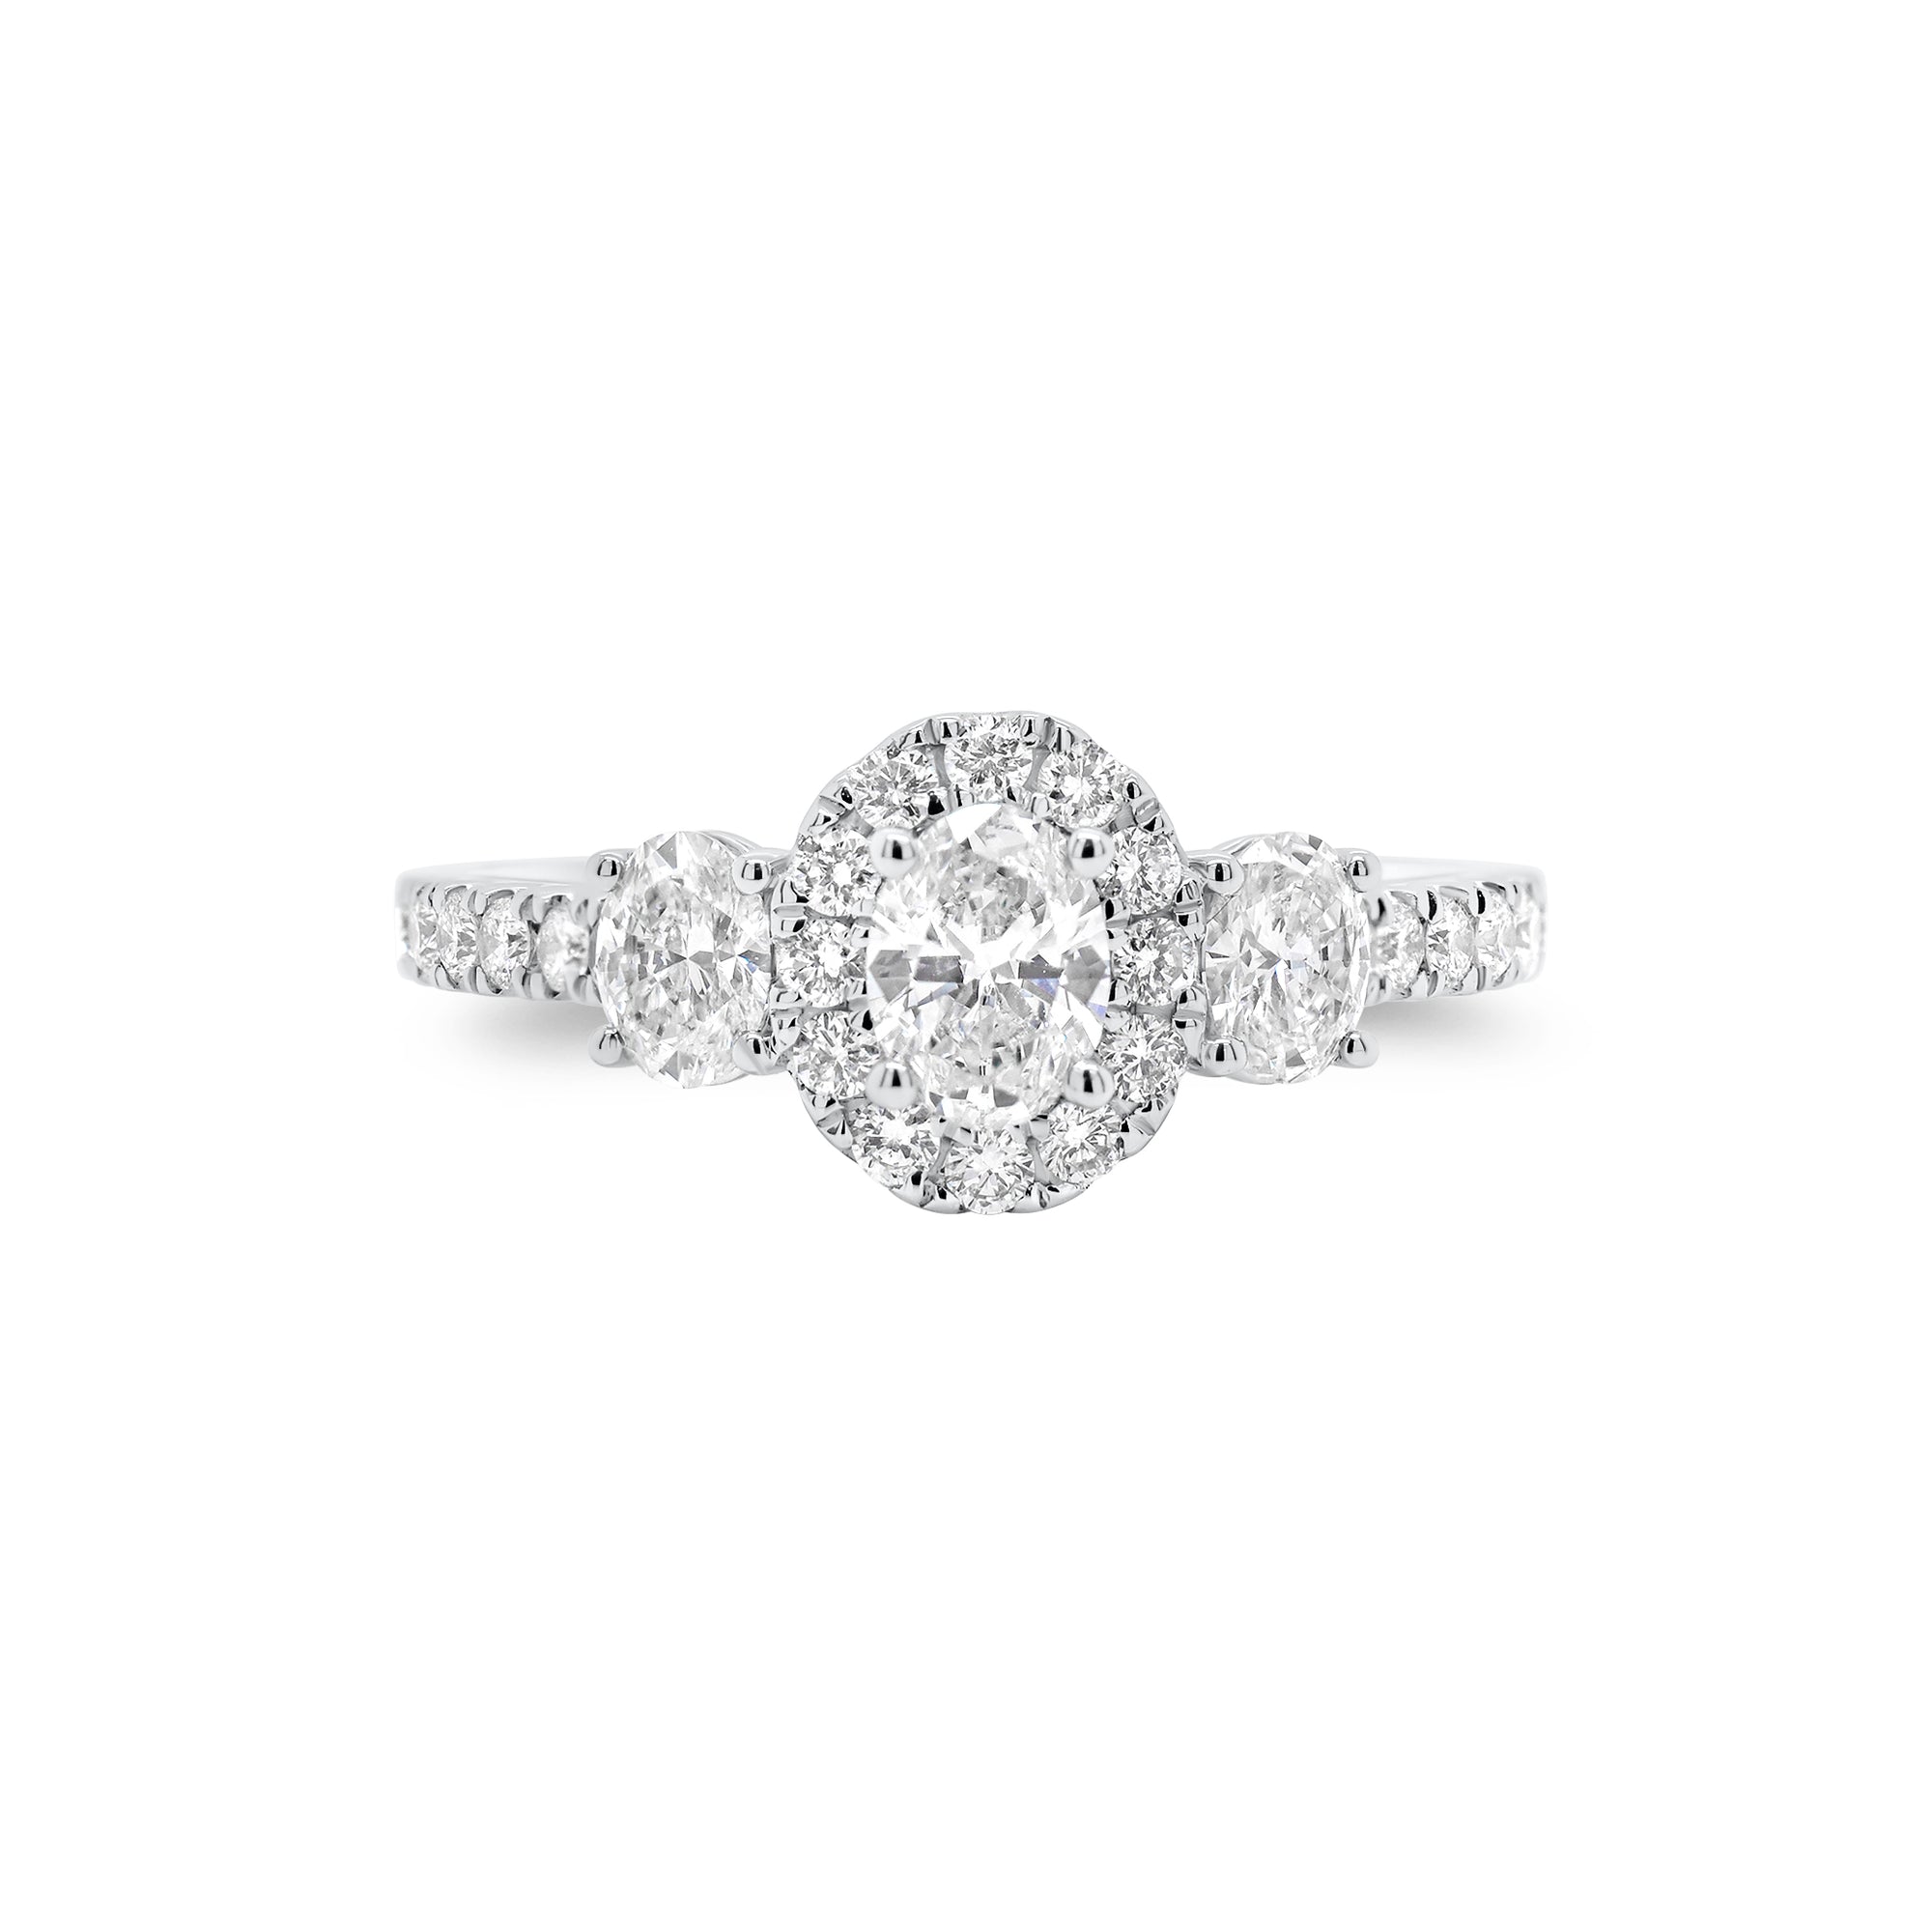 Oval Diamond Halo Three-Stone Engagement Ring - 18K gold weighing 2.90 grams  - 0.31 ct oval-shaped diamond  - 2 oval-shaped diamonds weighing 0.33 carats  - 24 round diamonds weighing 0.31 carats